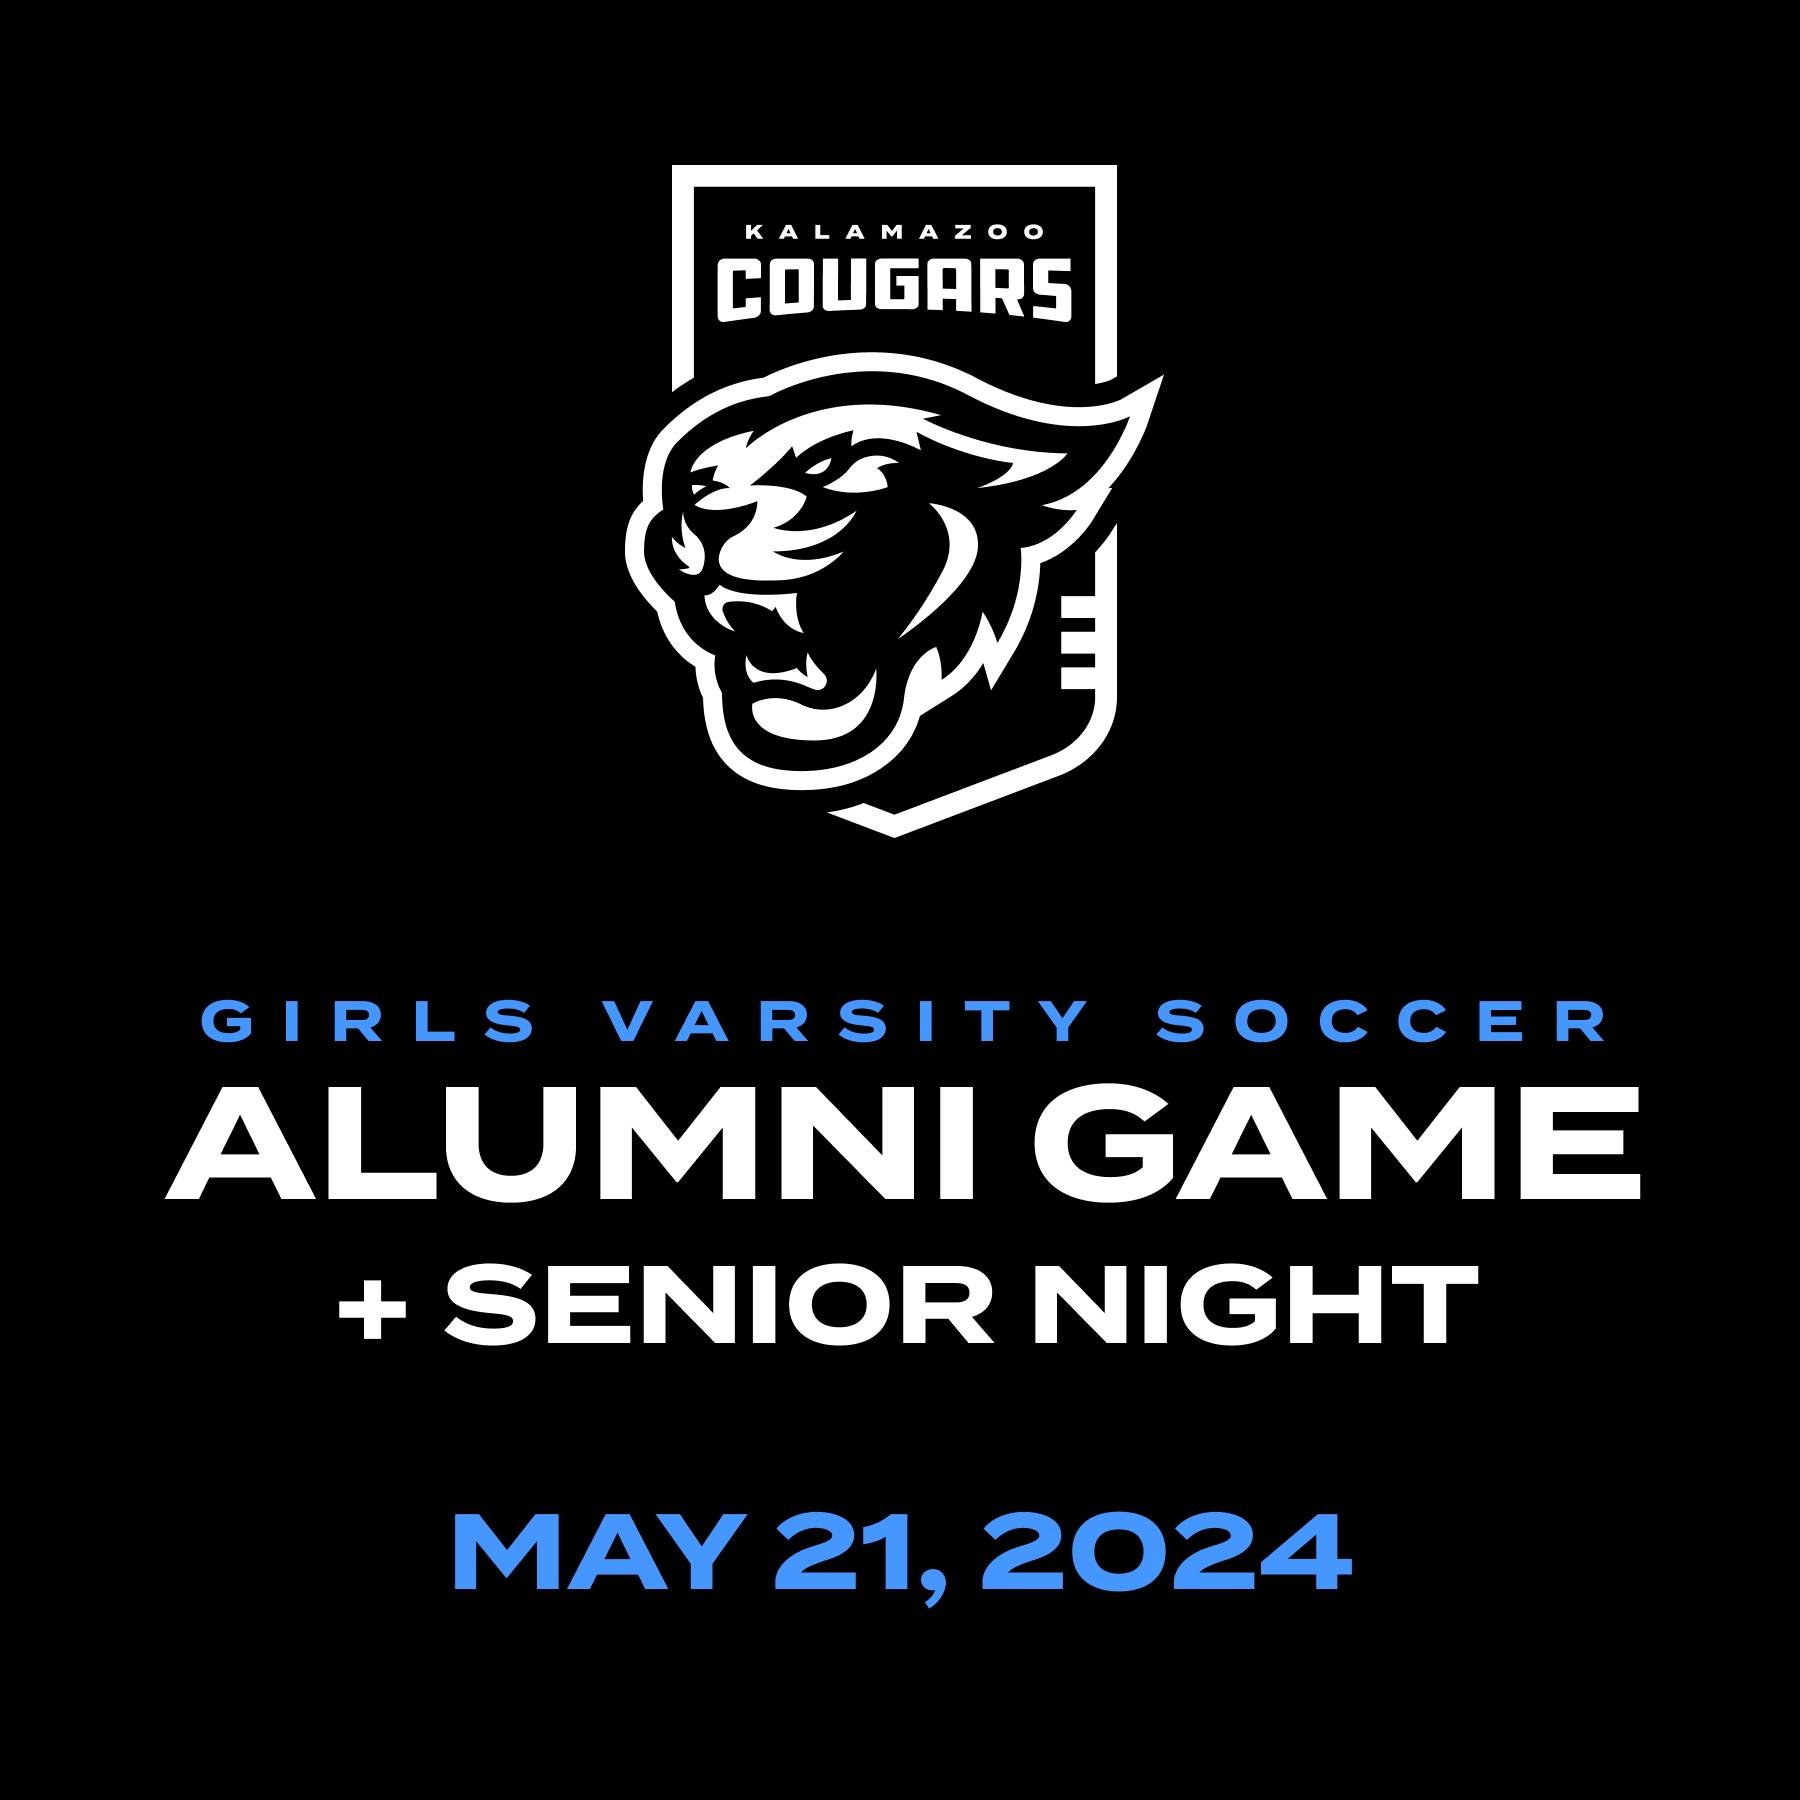 Alumni Soccer Game vs Varsity is on May 21st. It will also be Senior night!

Game will start at 6pm at 6th St fields!

Former Cougar Girls Soccer Players&mdash;email coach Chapman at freudenburg@gmail.com to sign up and get more details!